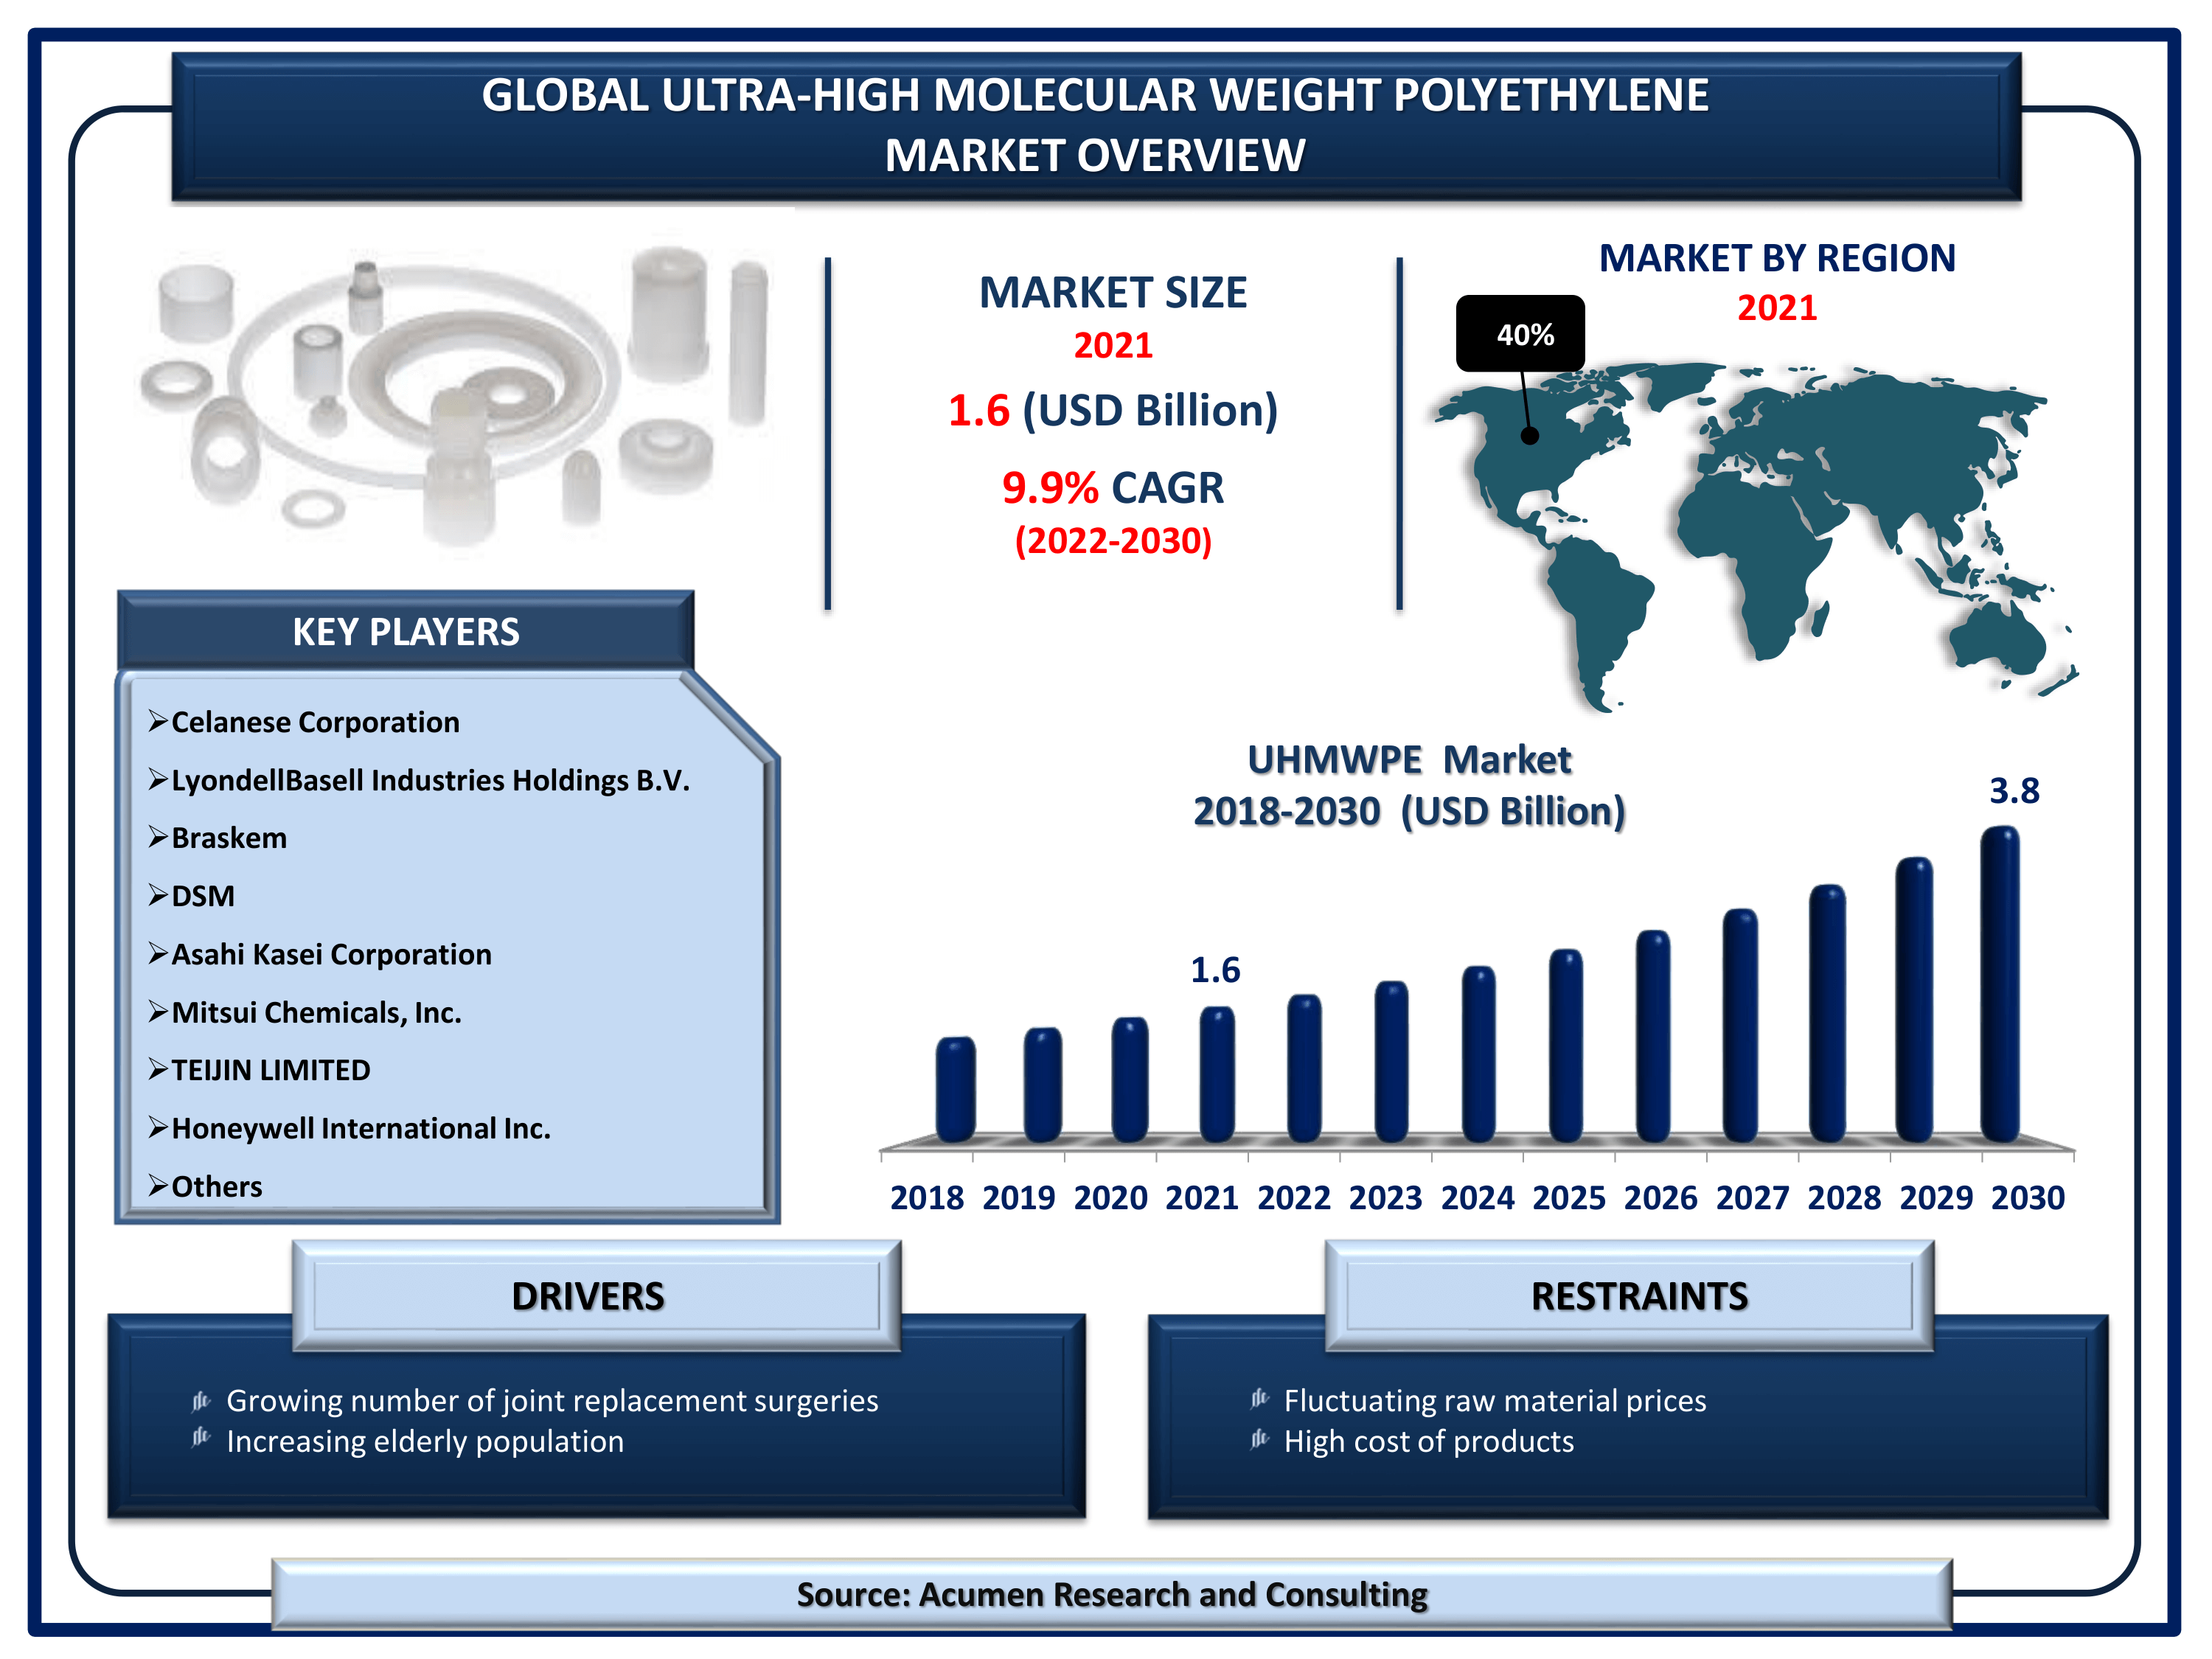 Global ultra-high molecular weight polyethylene market revenue is estimated to reach USD 3.8 Billion by 2030 with a CAGR of 9.9% from 2022 to 2030